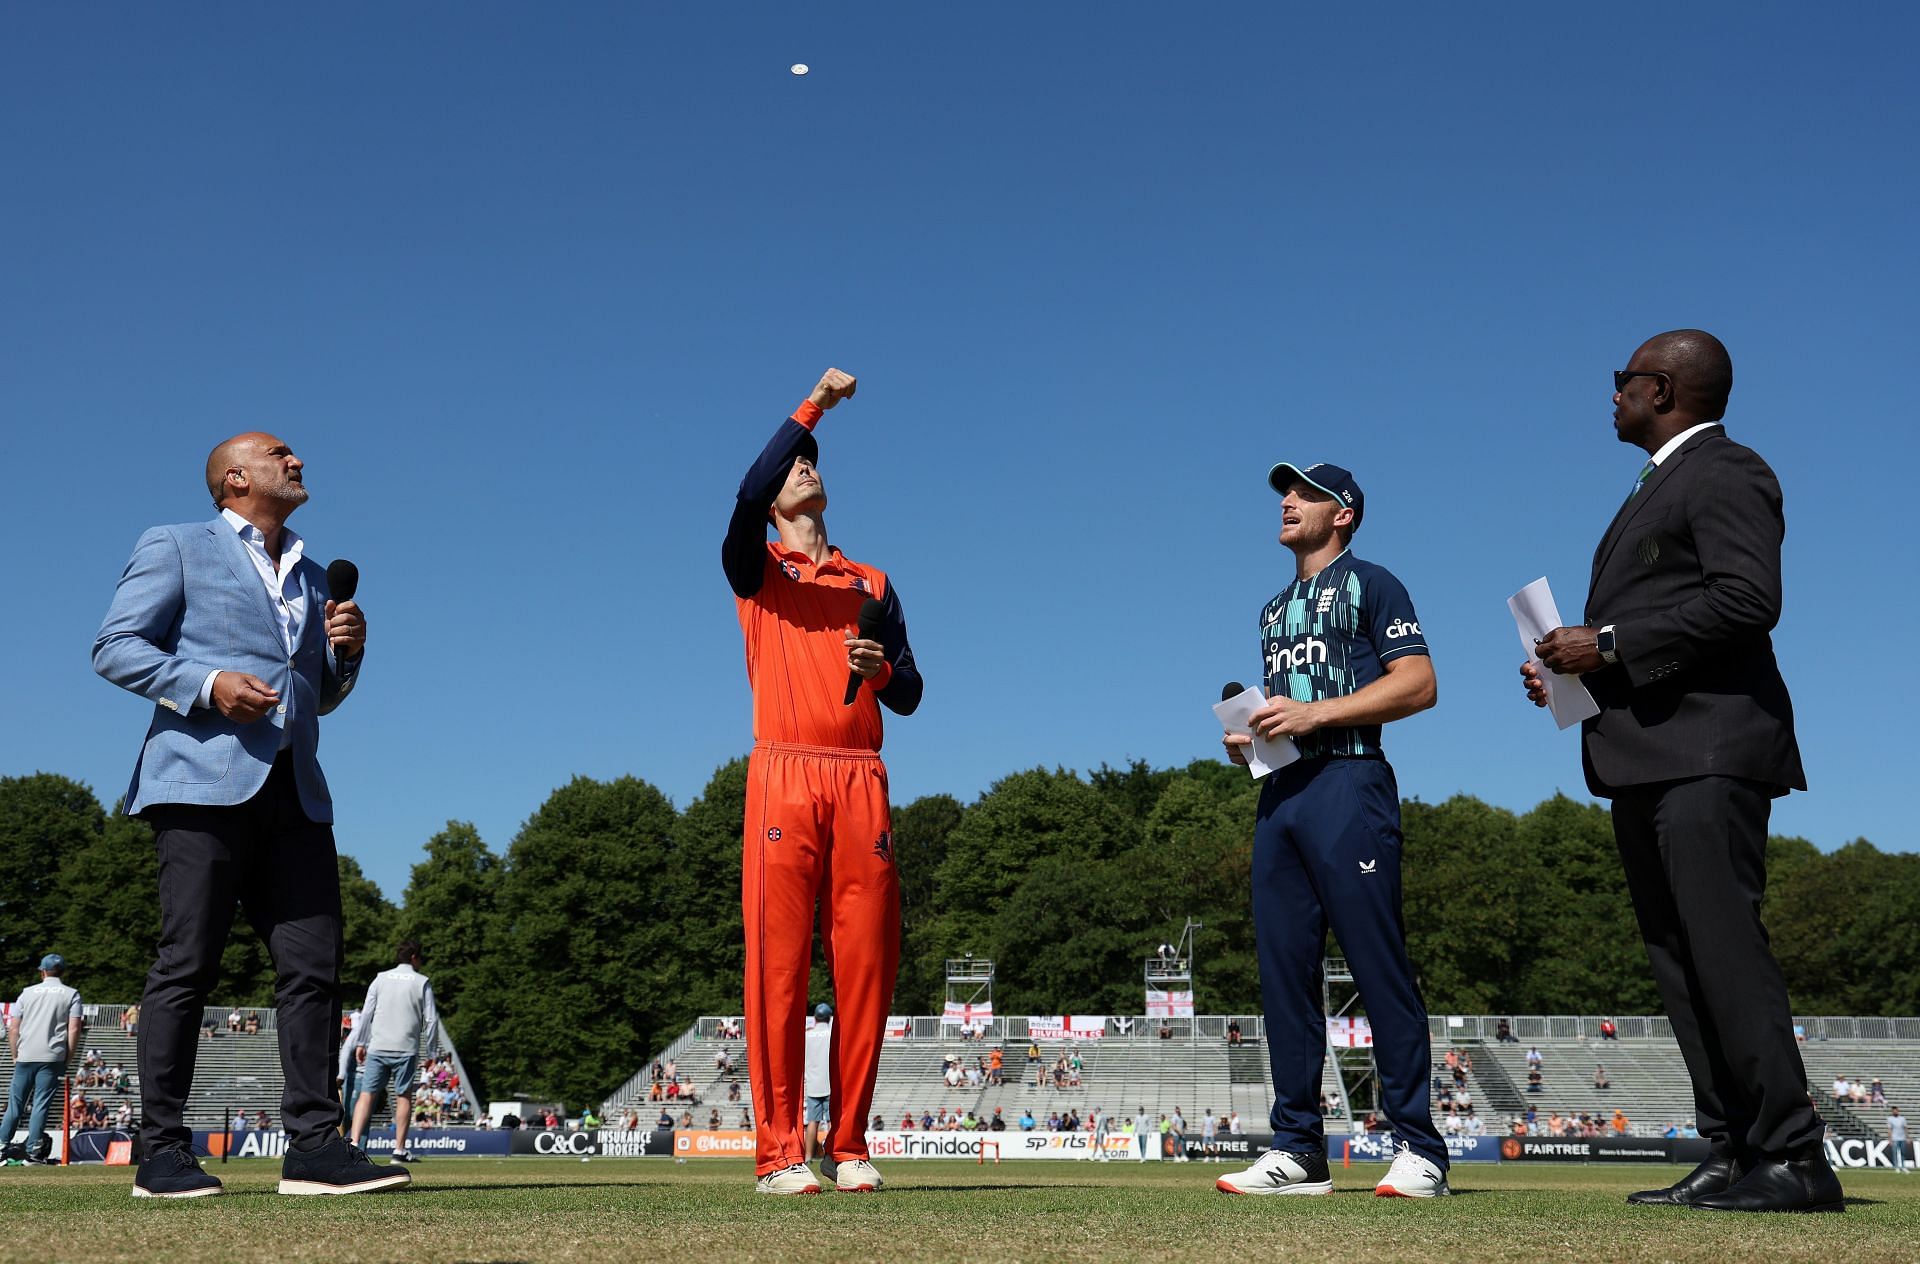 The Netherlands recently hosted England for a three-match ODI series 